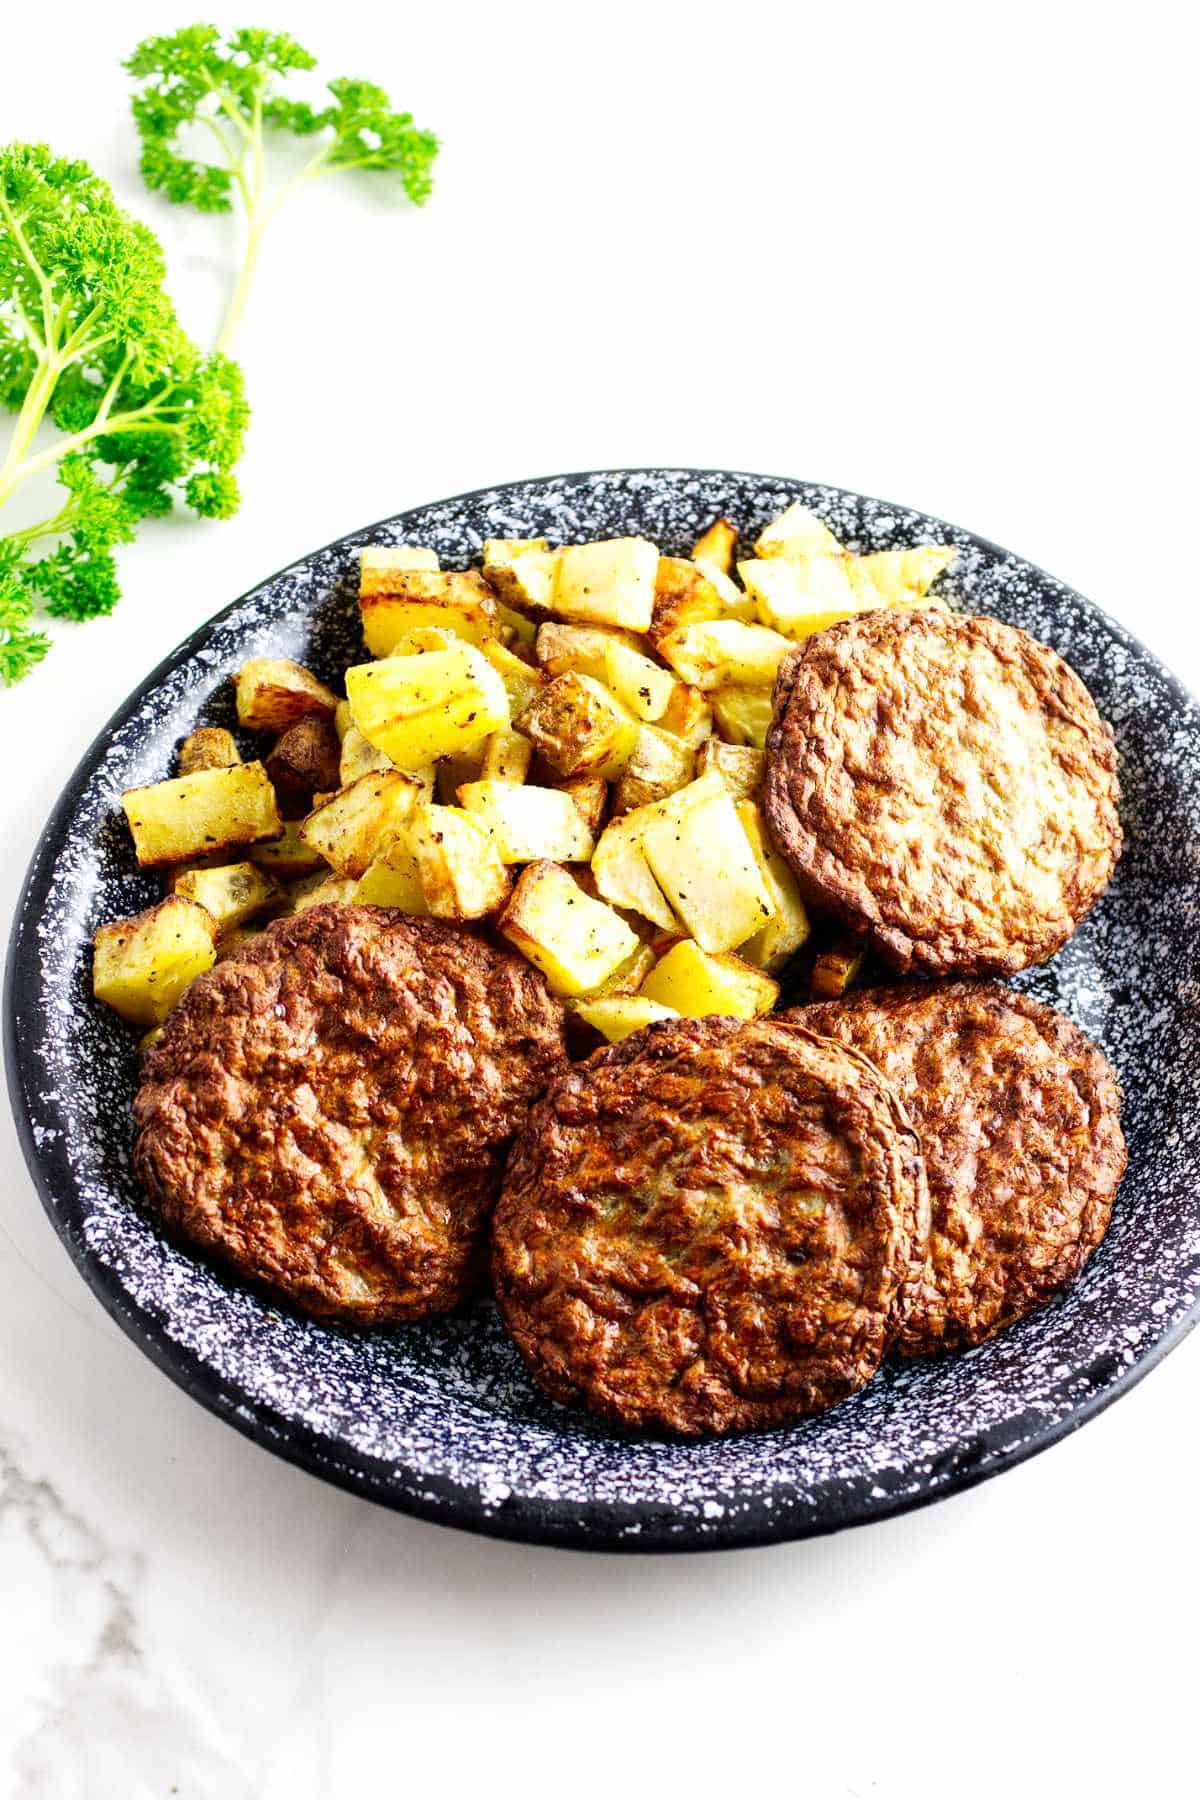 platter of diced potatoes and sausage patties.